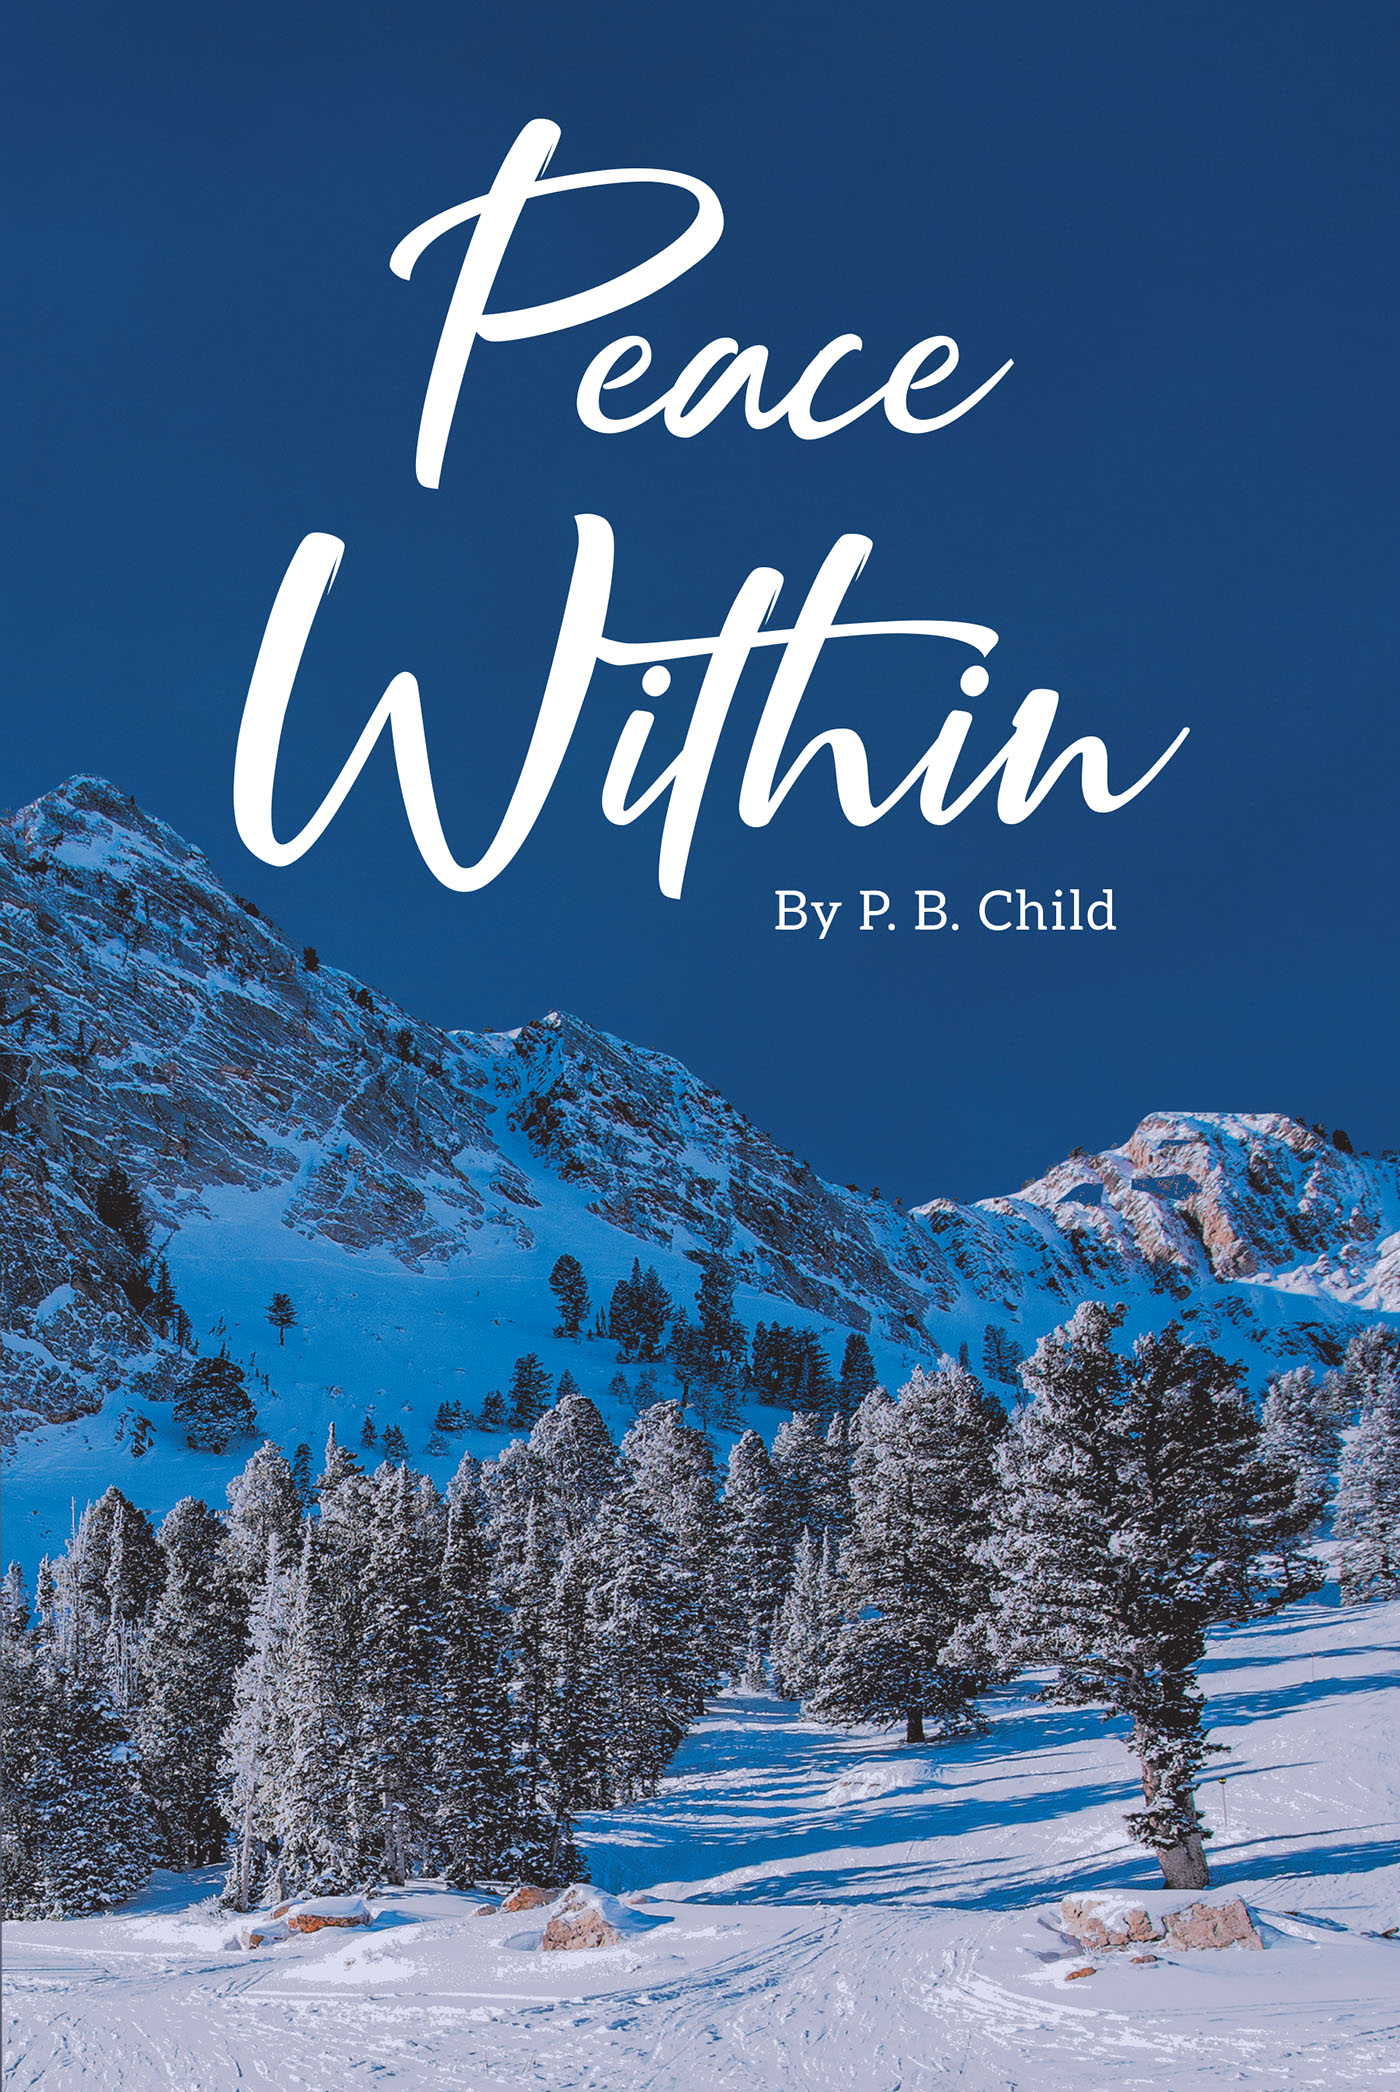 Author P. B. Child’s New Book, "Peace Within," is a Faith-Based Story of One Family’s Struggles to Stay Together in a World of Violence and Tragedy